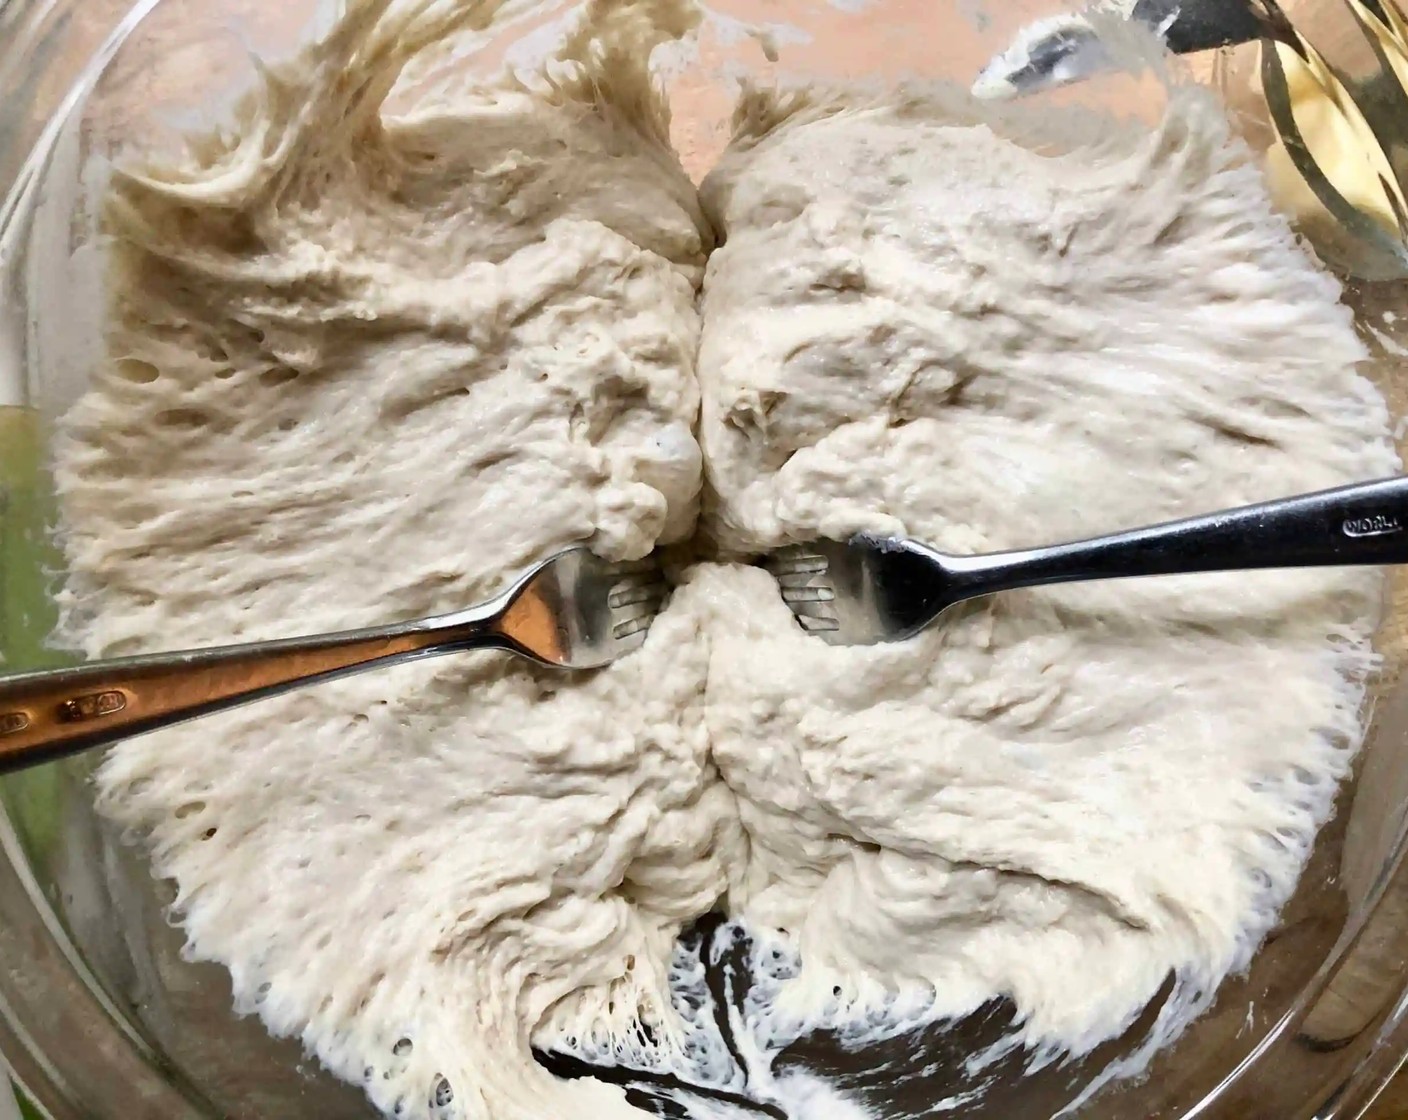 step 7 Using your two forks and working from the center out, separate the dough into two equal pieces. Use the forks to lift each portion into a prepared bowl. Do not cover the bowls.